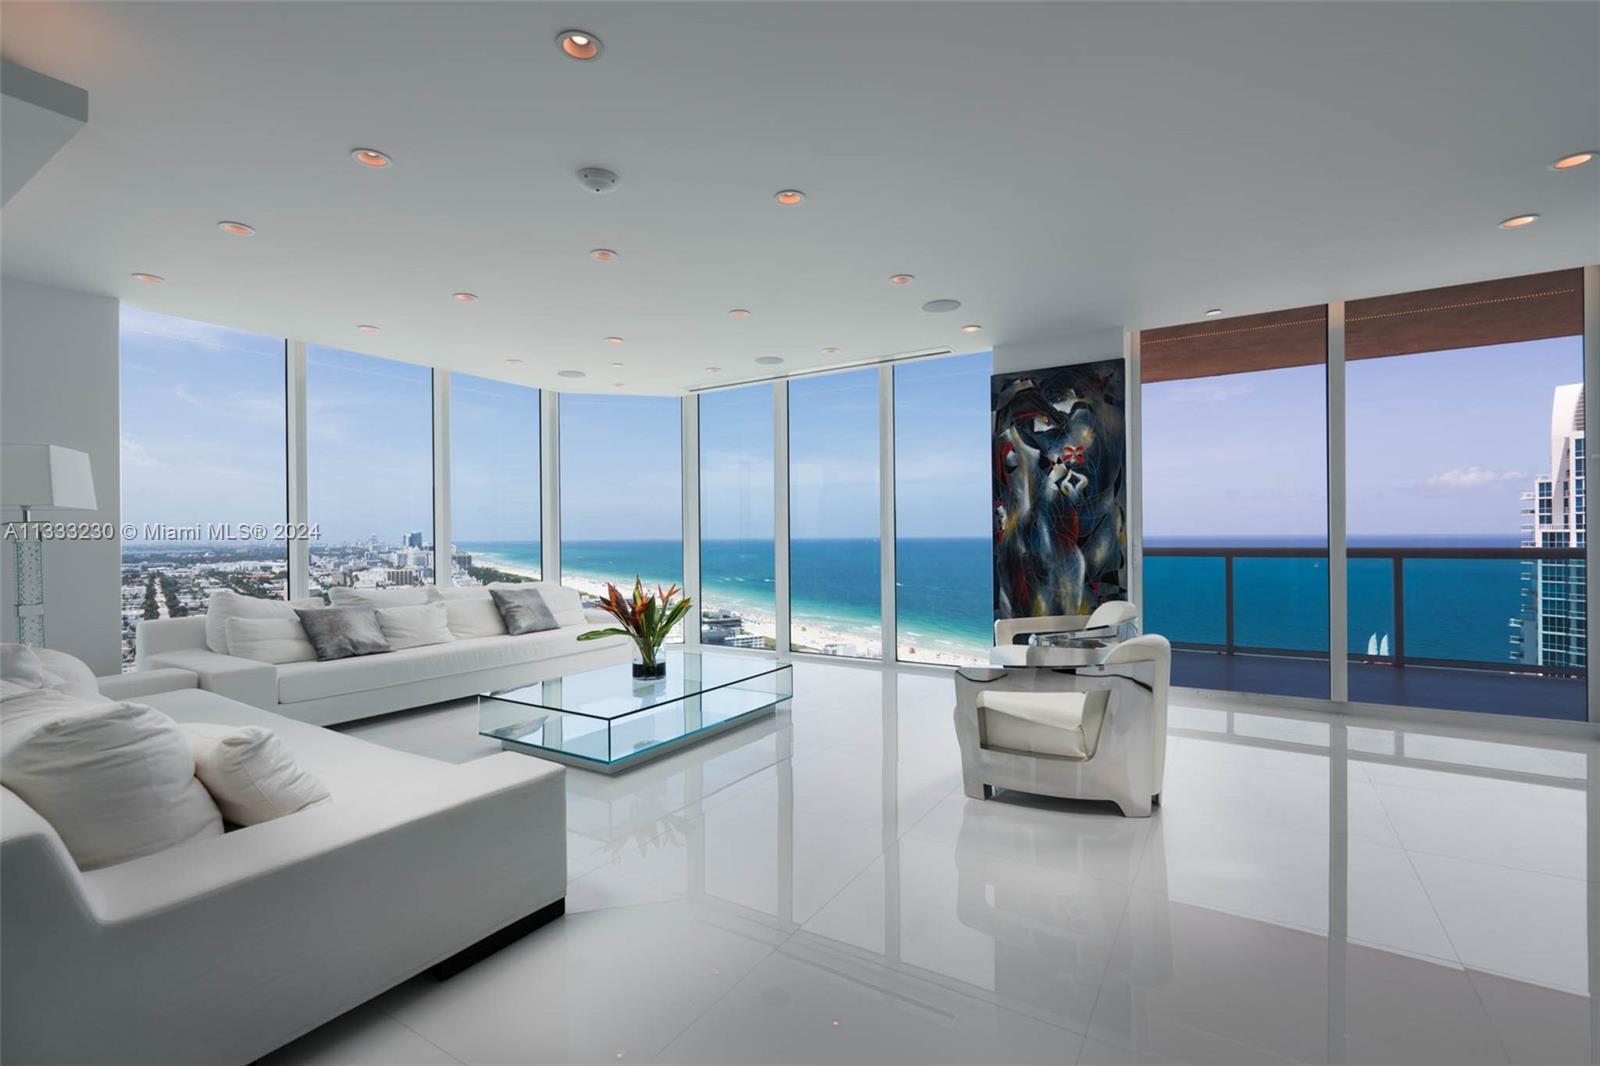 Large 4,723 sq ft.  Rare double unit with panoramic views of beach, ocean, bay, Miami skyline and cruise ships, South Pointe Park.    Dual elevators open into private art gallery entrance.  Perfect for large family and entertaining.  2 large primary bedroom suites. (4BR).  Renovated 2013. Enjoy South of Fifth lifestyle at its finest!